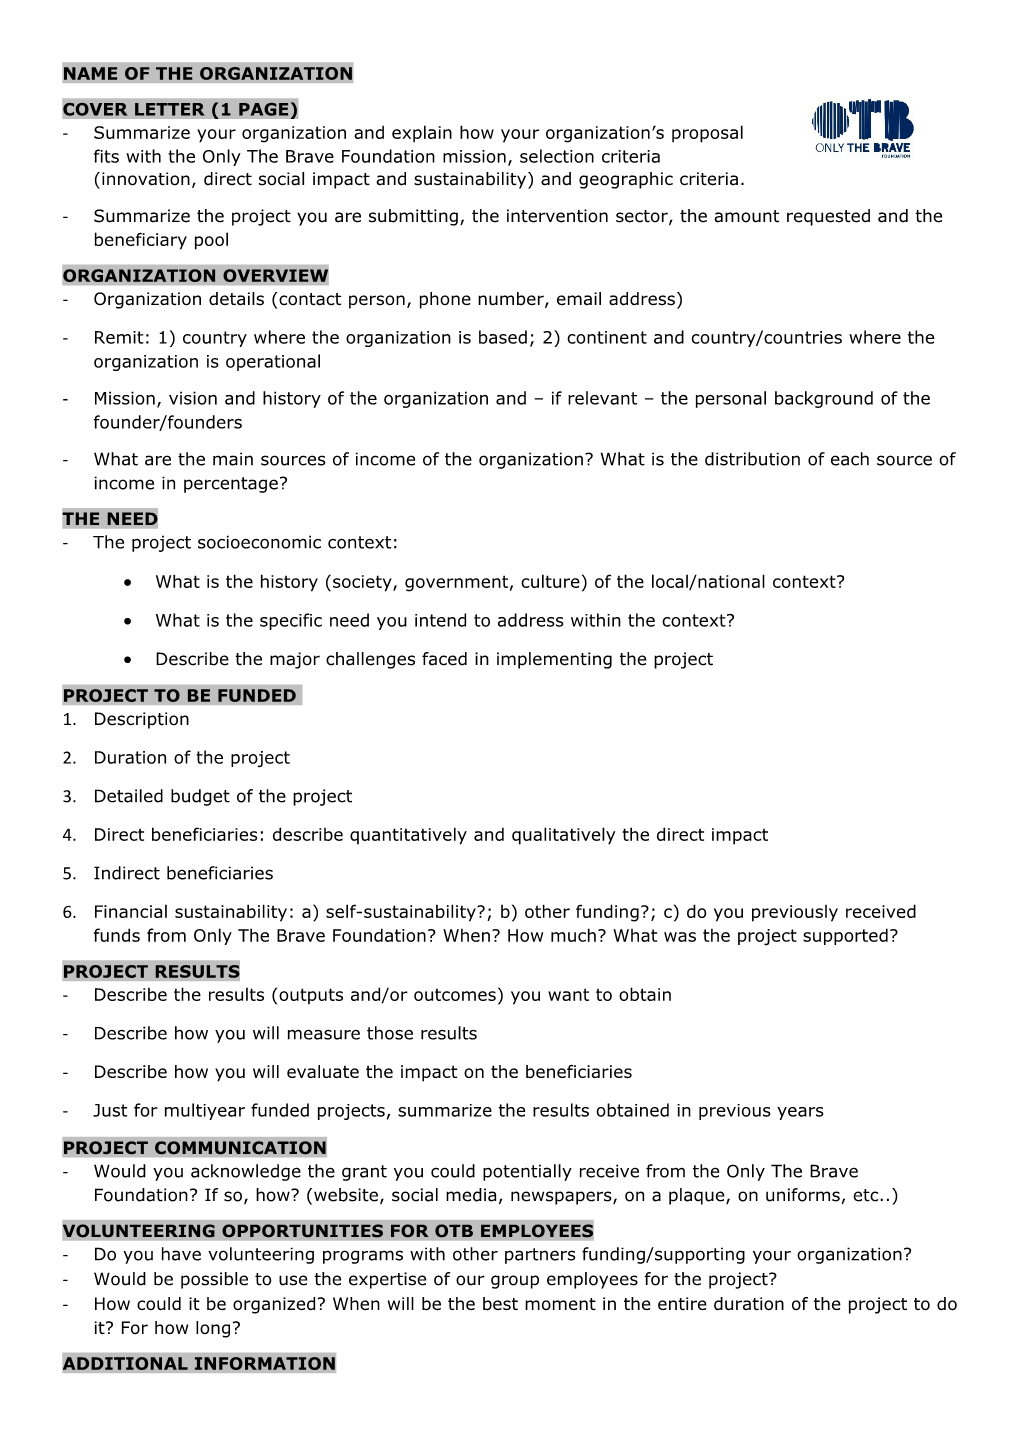 Only the Brave Foundation Application Form